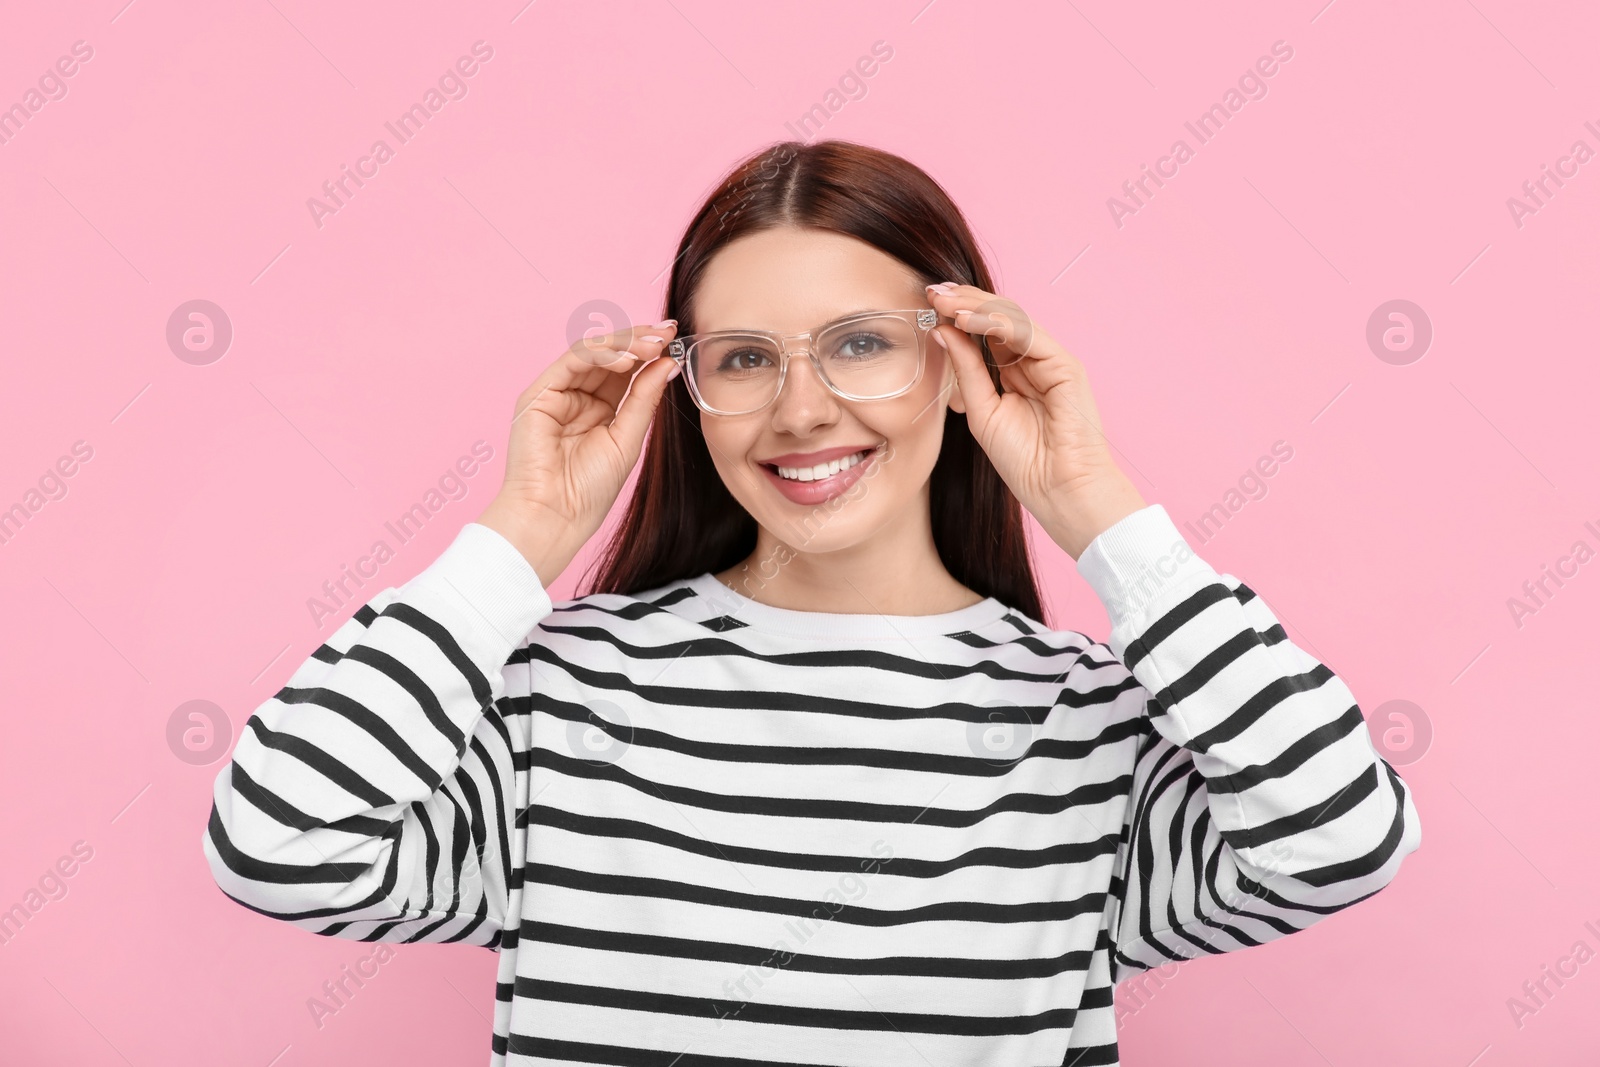 Photo of Portrait of smiling woman in stylish eyeglasses on pink background